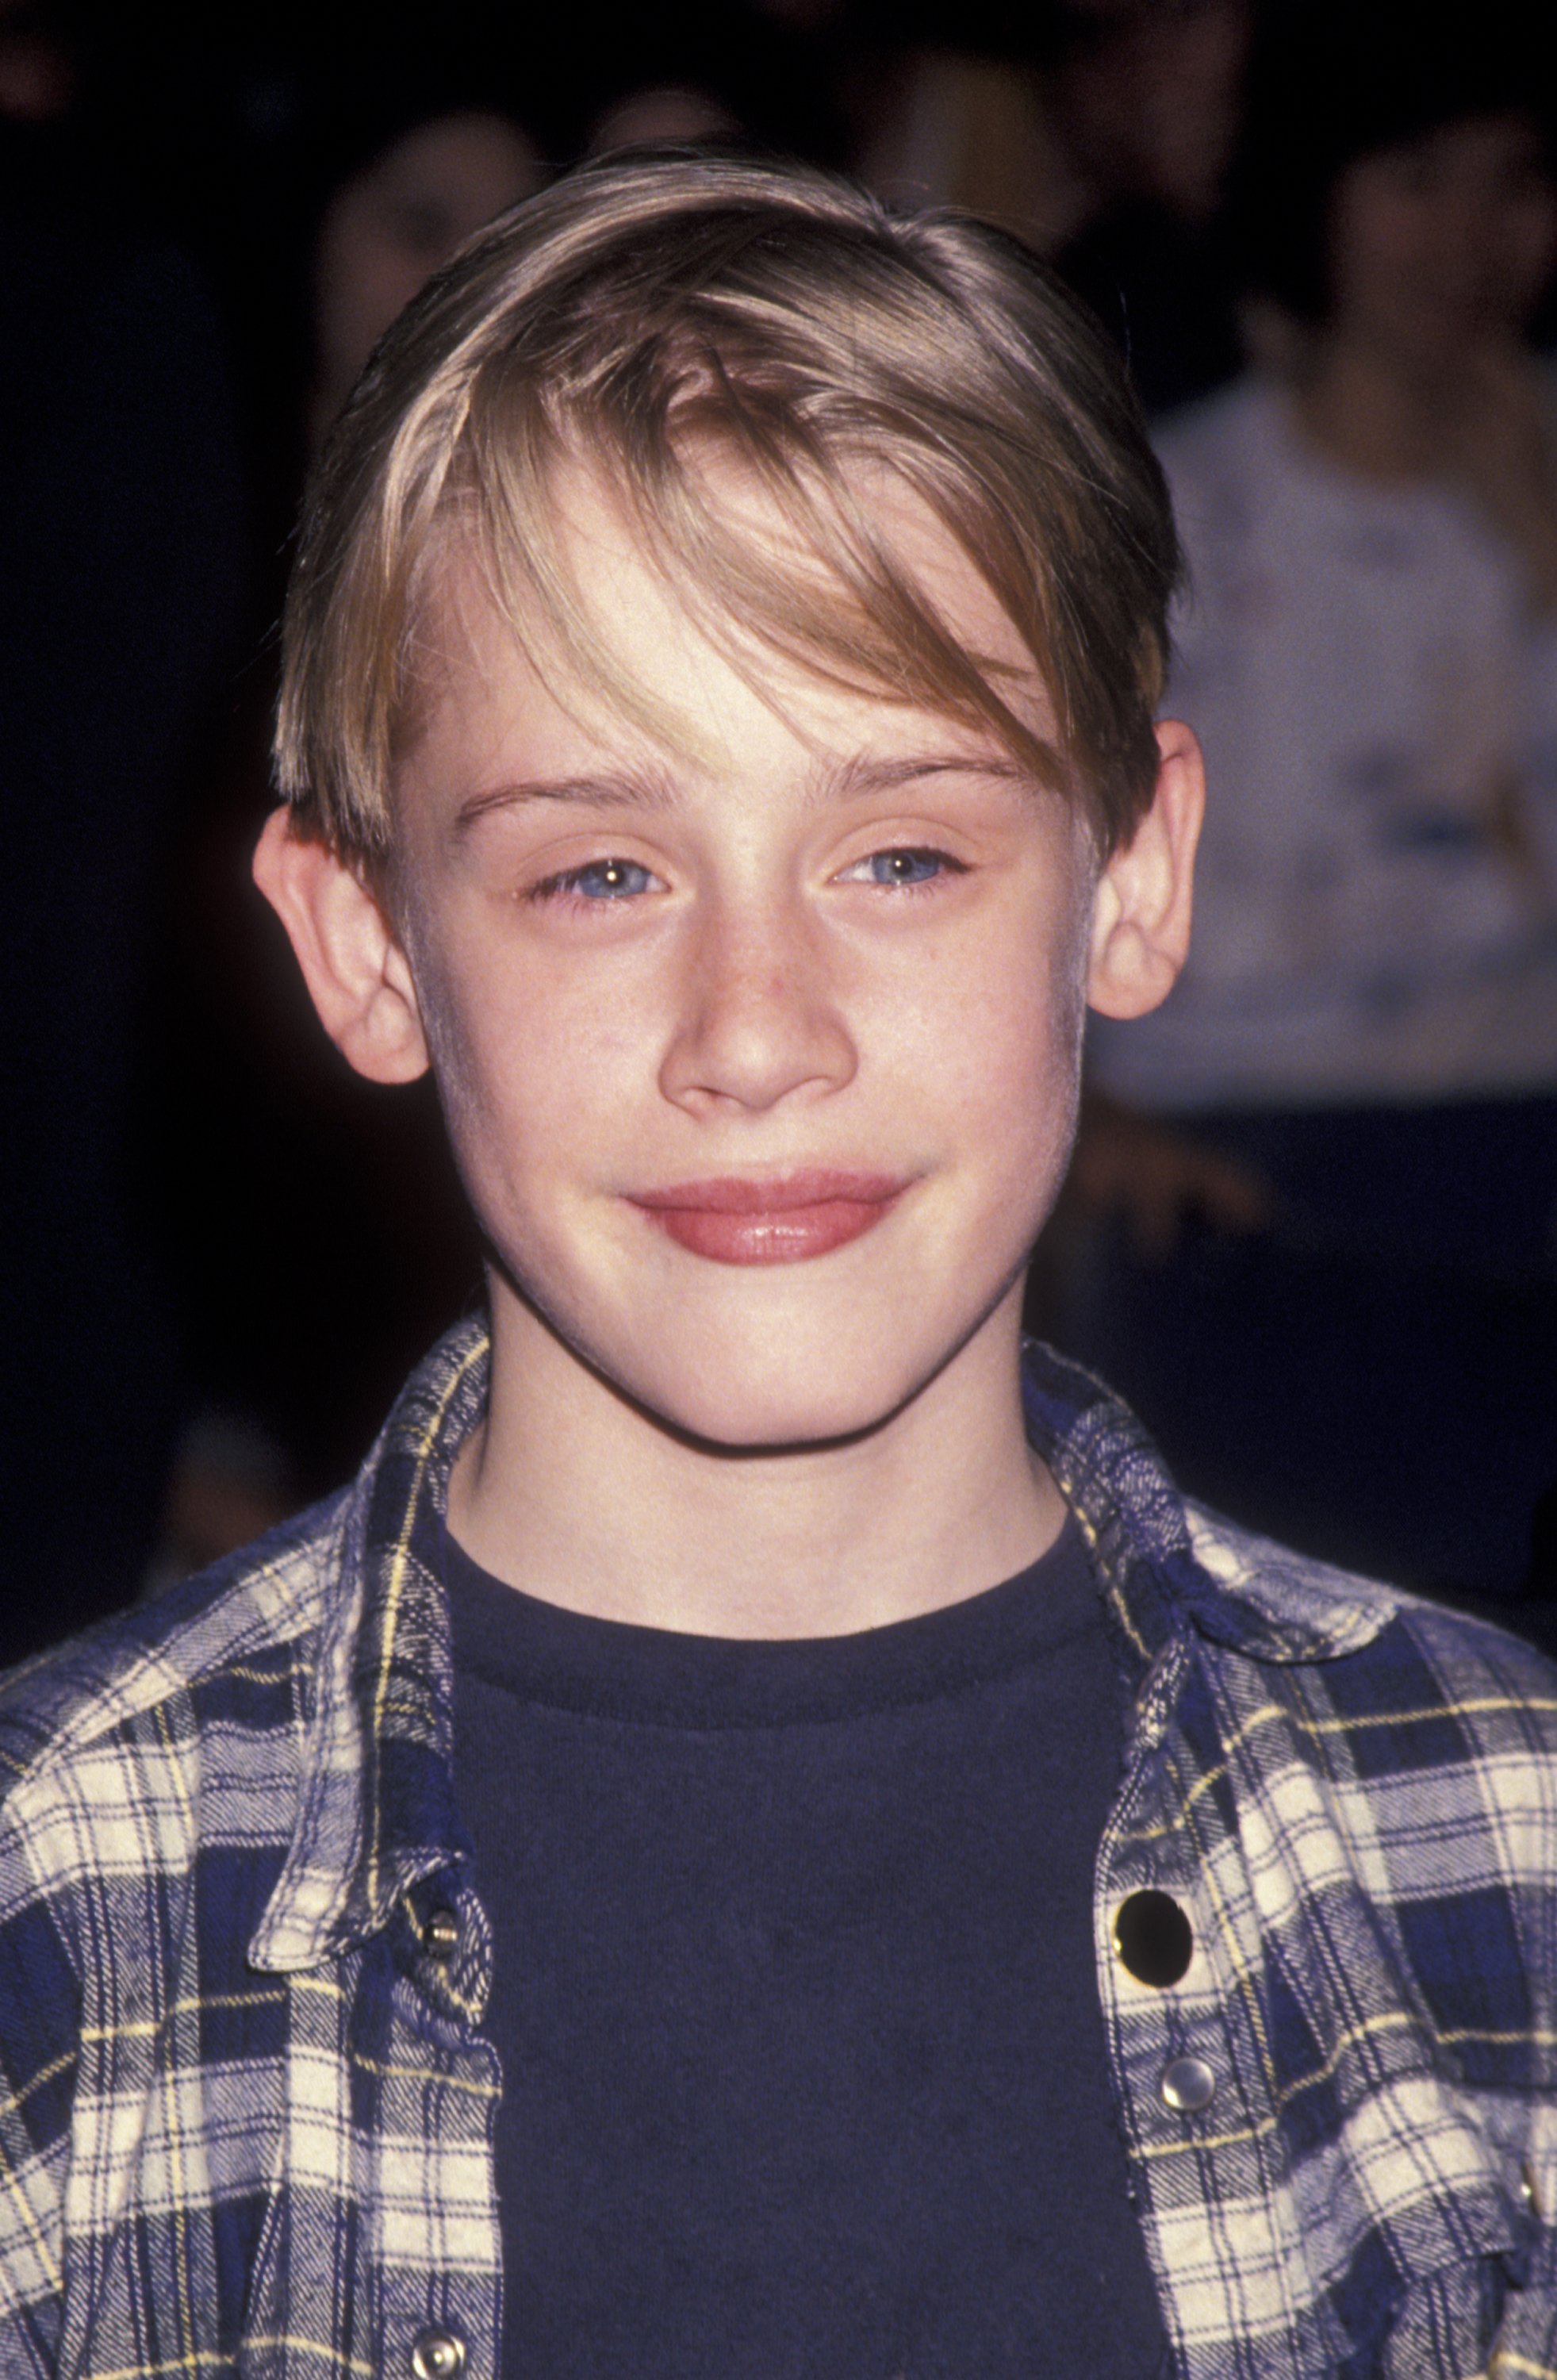 Macaulay Culkin attends the screening of "Getting Even With Dad" on May 15, 1994 at the Plaza Theater in New York City | Source: Getty Images 